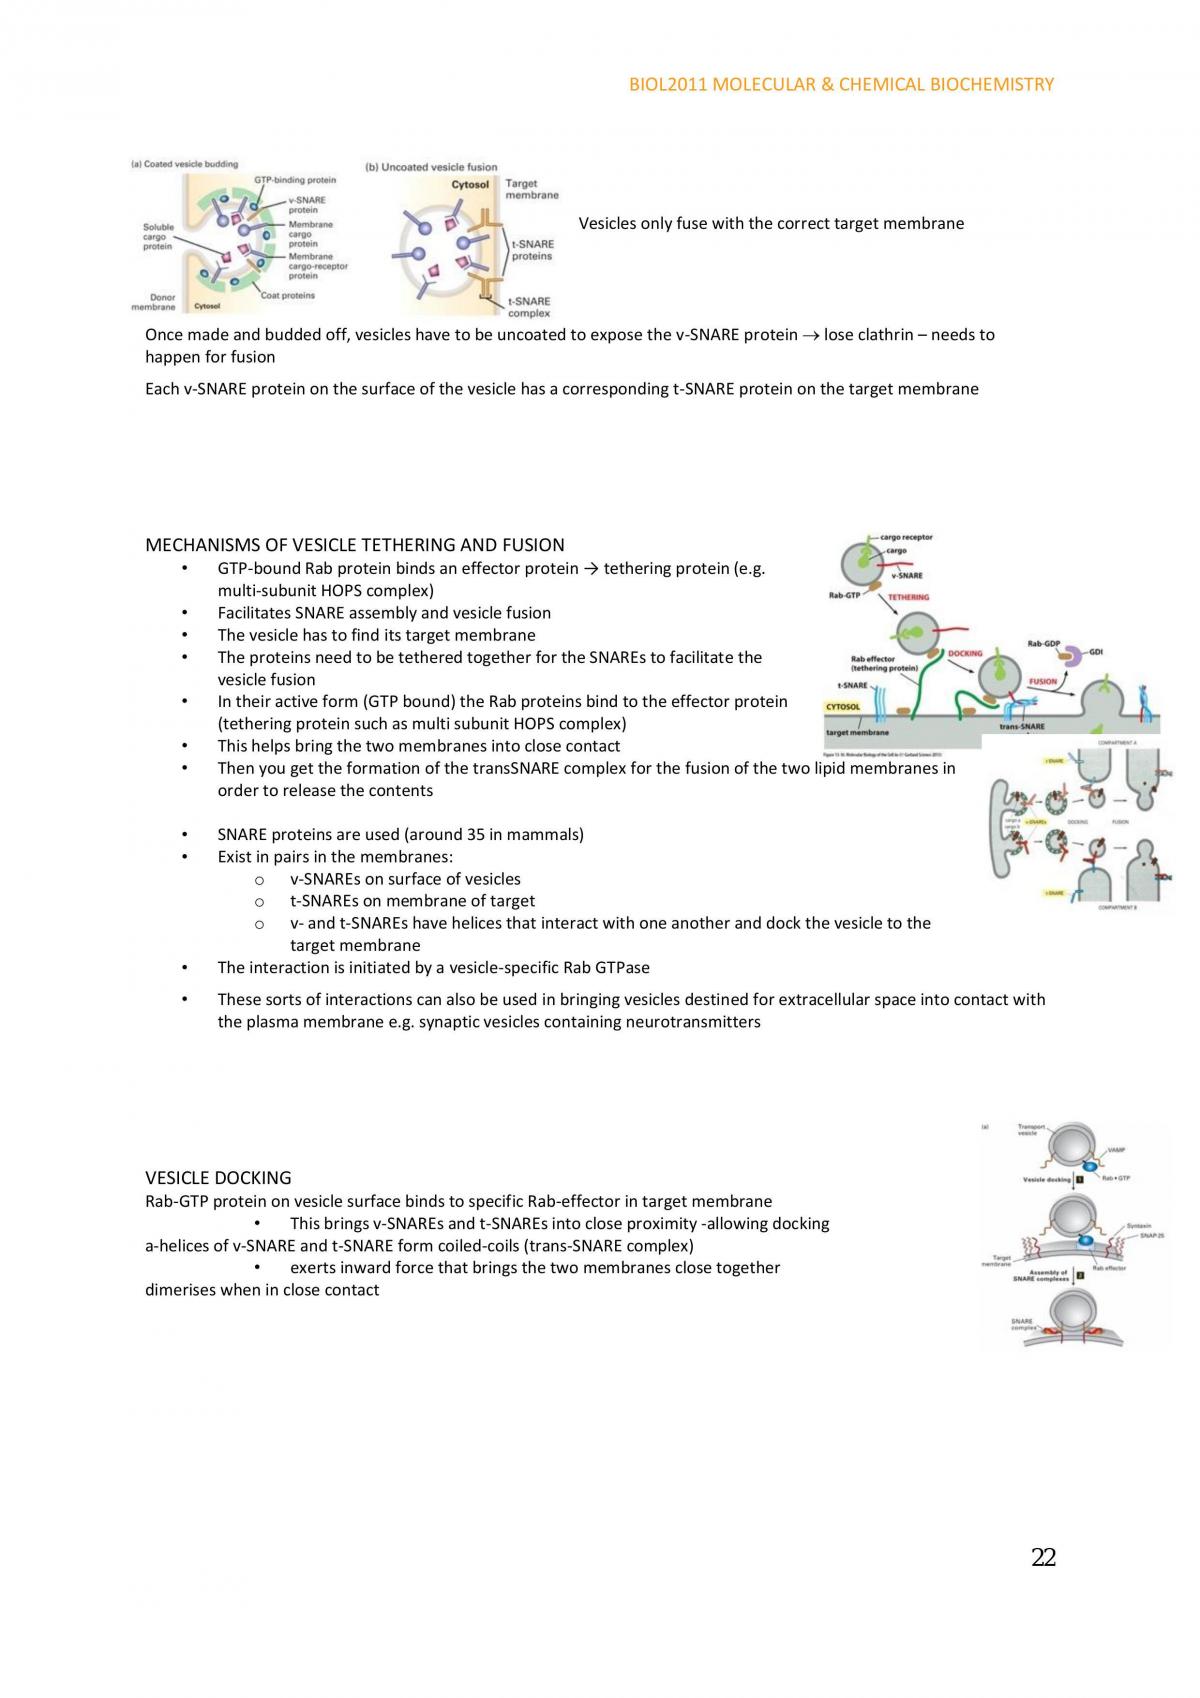 Molecular and Cellular Biochemistry Notes - Page 22